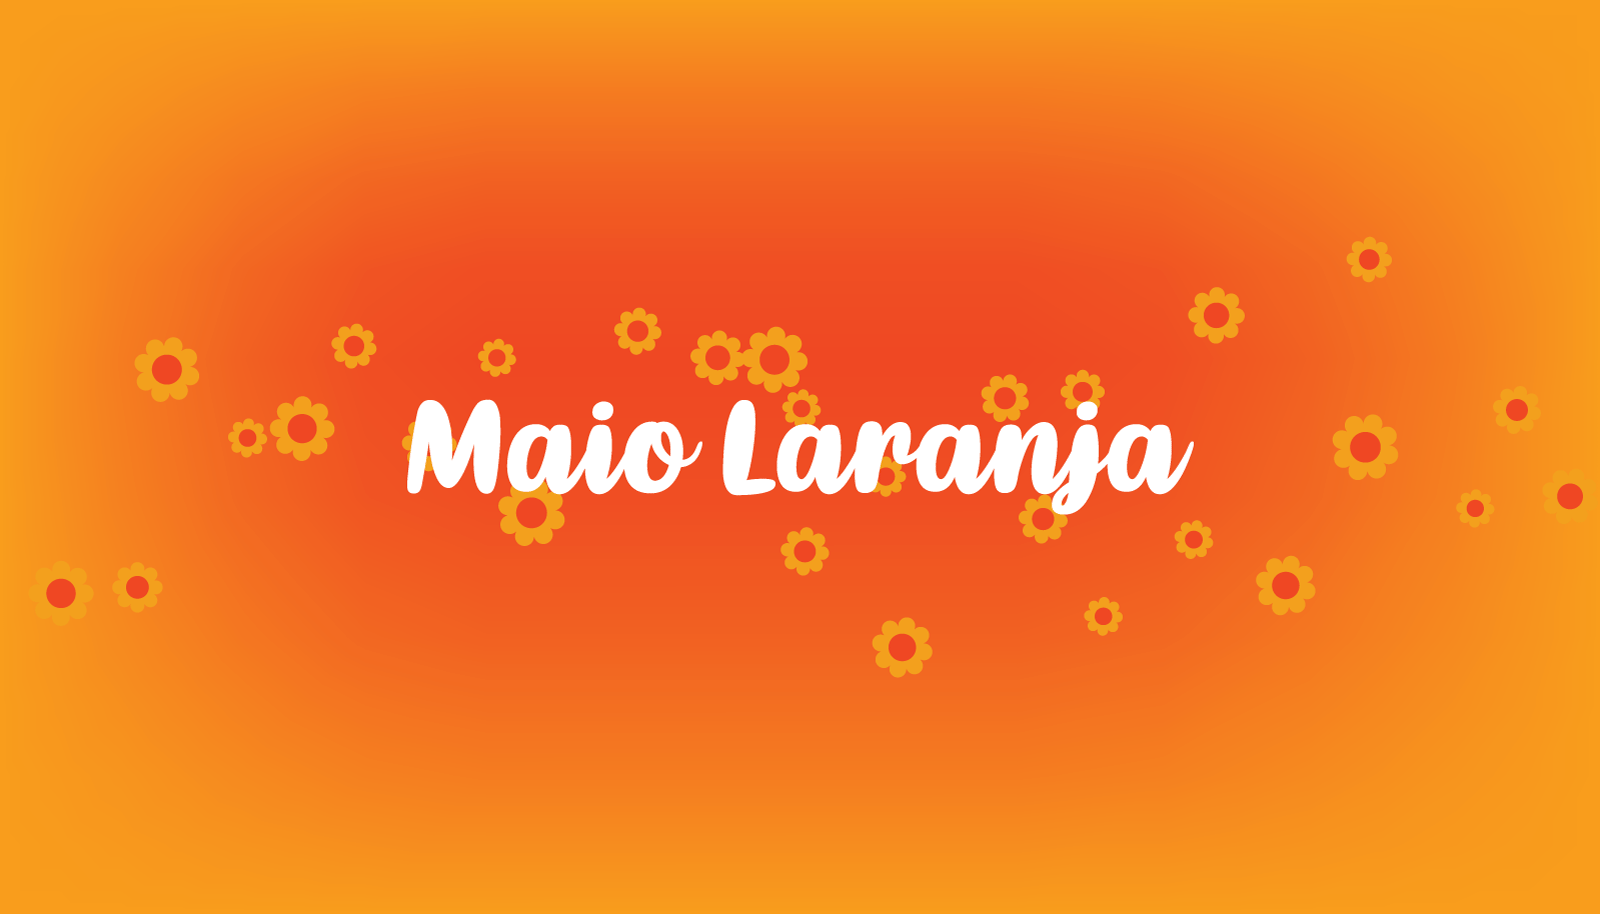 Maio laranja campaign against violence research of children 18 may design